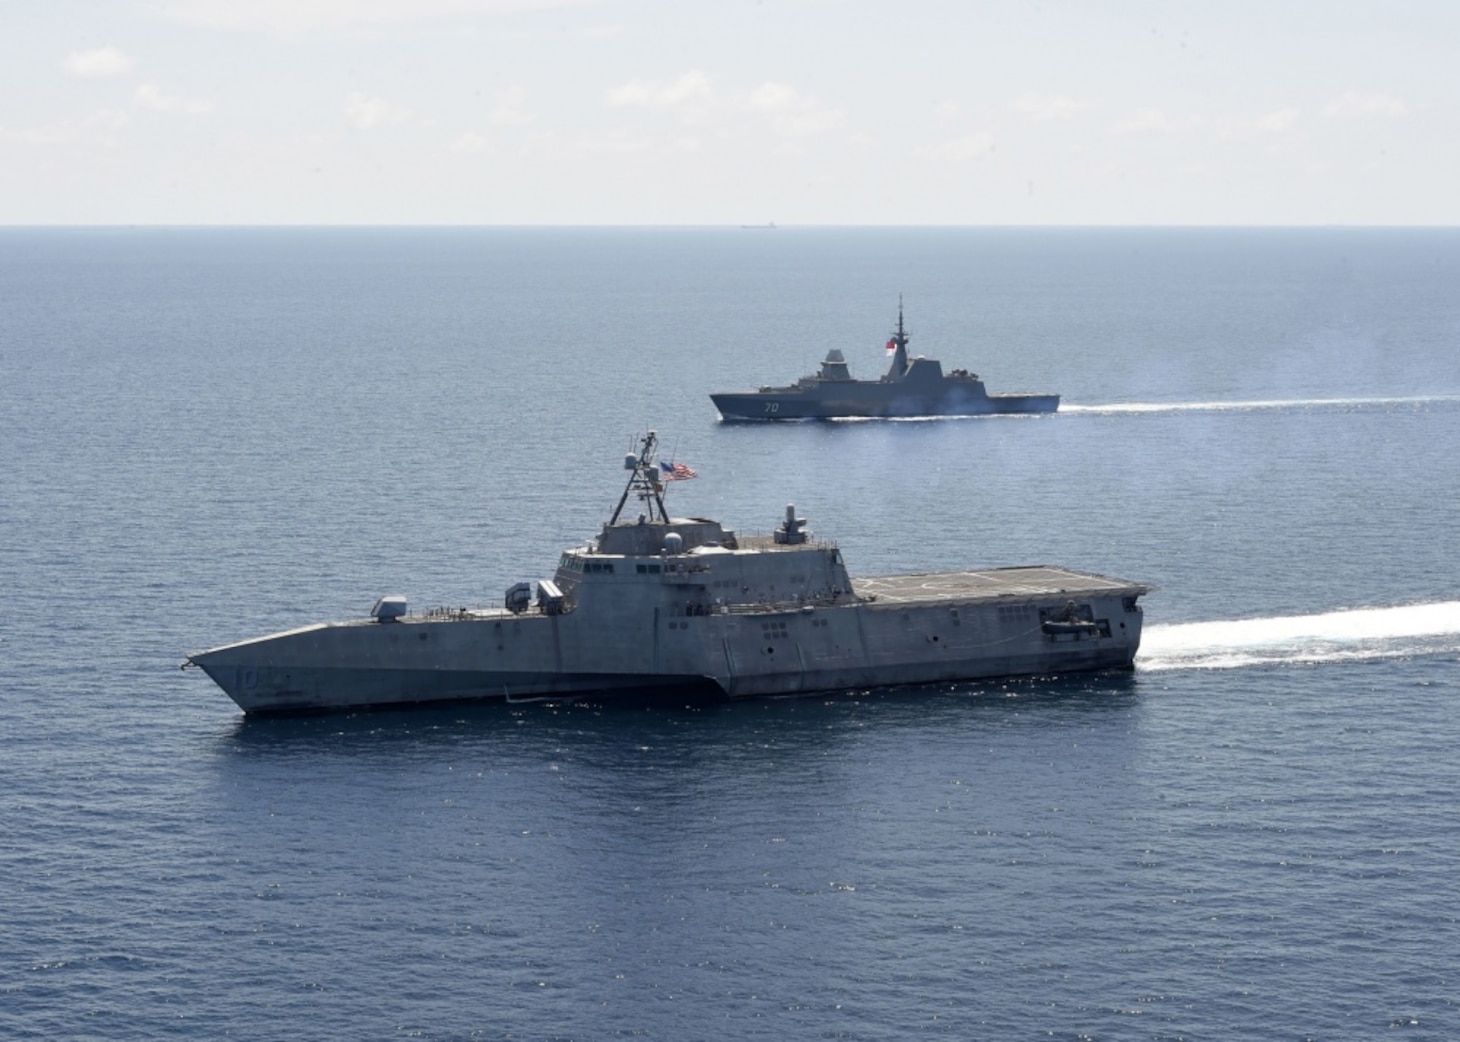 SOUTH CHINA SEA (May 25, 2020) The Independence-variant littoral combat ship USS Gabrielle Giffords (LCS 10), left, exercises with the Republic of Singapore Navy Formidable-class multi-role stealth frigate RSS Steadfast (FFS 70) in the South China Sea, May 25, 2020. Gabrielle Giffords, part of Destroyer Squadron Seven, is on a rotational deployment, operating in the U.S. 7th Fleet area of operations to enhance interoperability with partners and serve as a ready-response force.